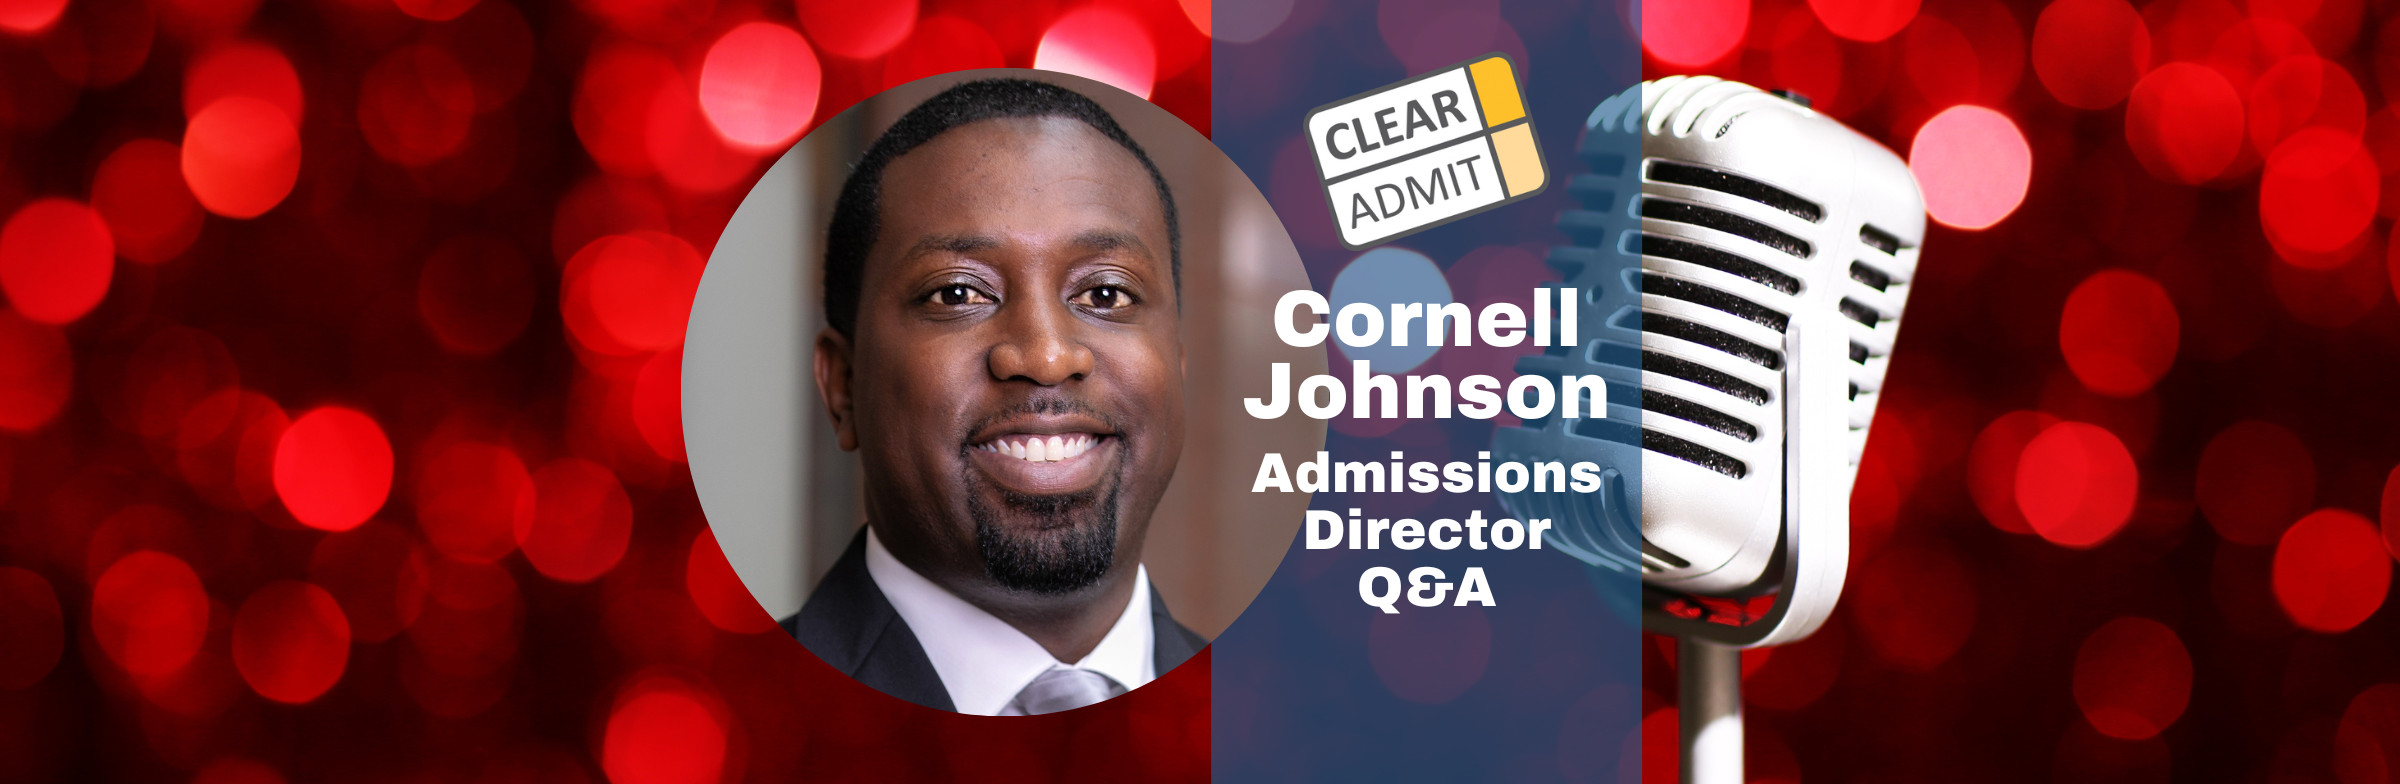 Image for Admissions Director Q&A: Eddie Asbie of Cornell University’s S.C. Johnson Graduate School of Management